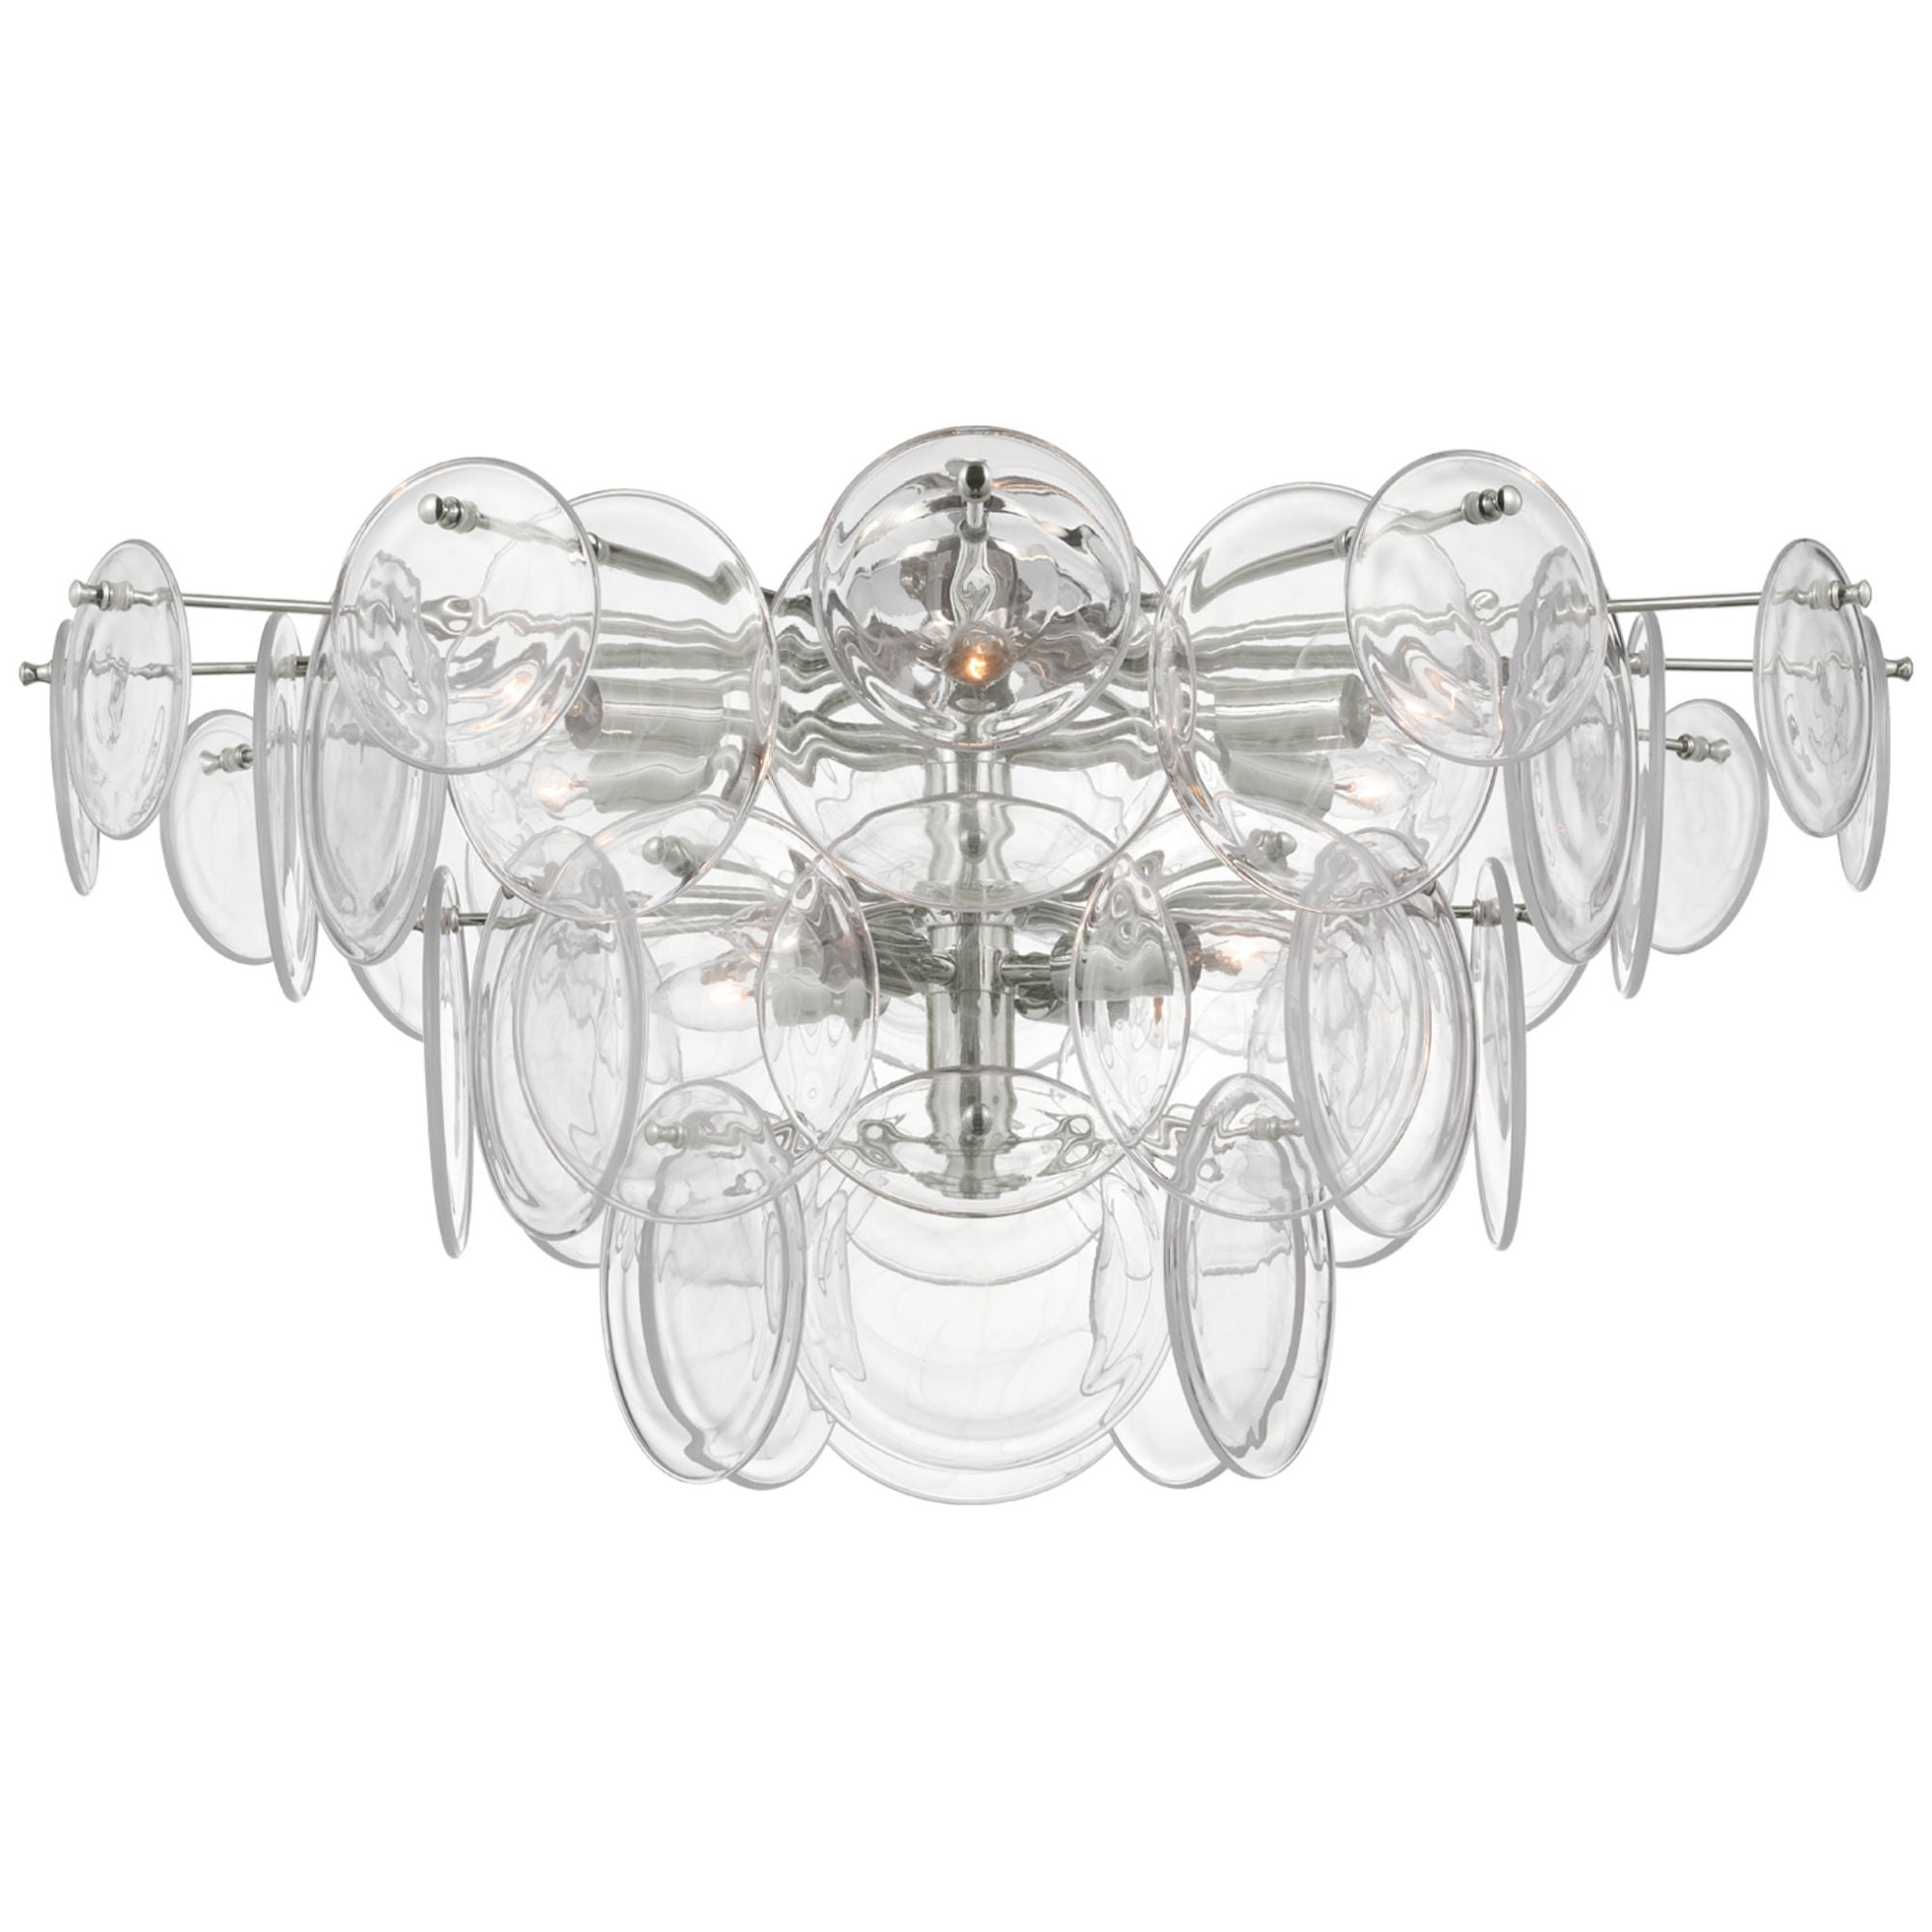 AERIN Loire Grande Flush Mount in Polished Nickel with Clear Strie Glass